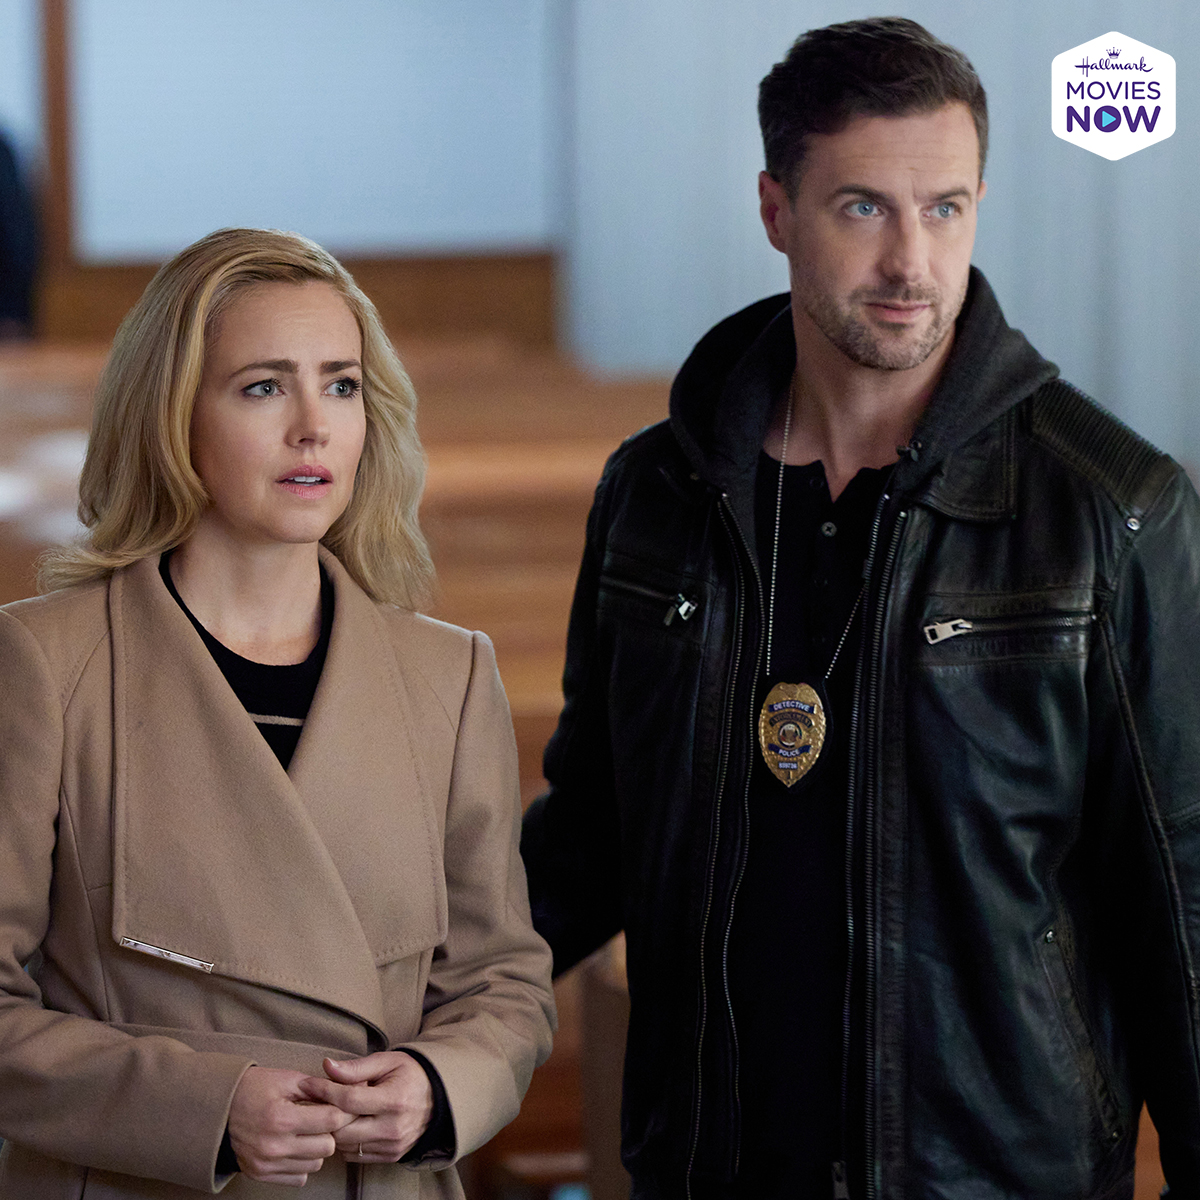 Do we have a new #sleuther team on the rise? Join Rachel @amandaschull and Jack @BrendanJPenny in the All New Hallmark Original, #FamilyPracticeMysteries: Coming Home now streaming on #HallmarkMoviesNow! #Chessies #Sleuthers